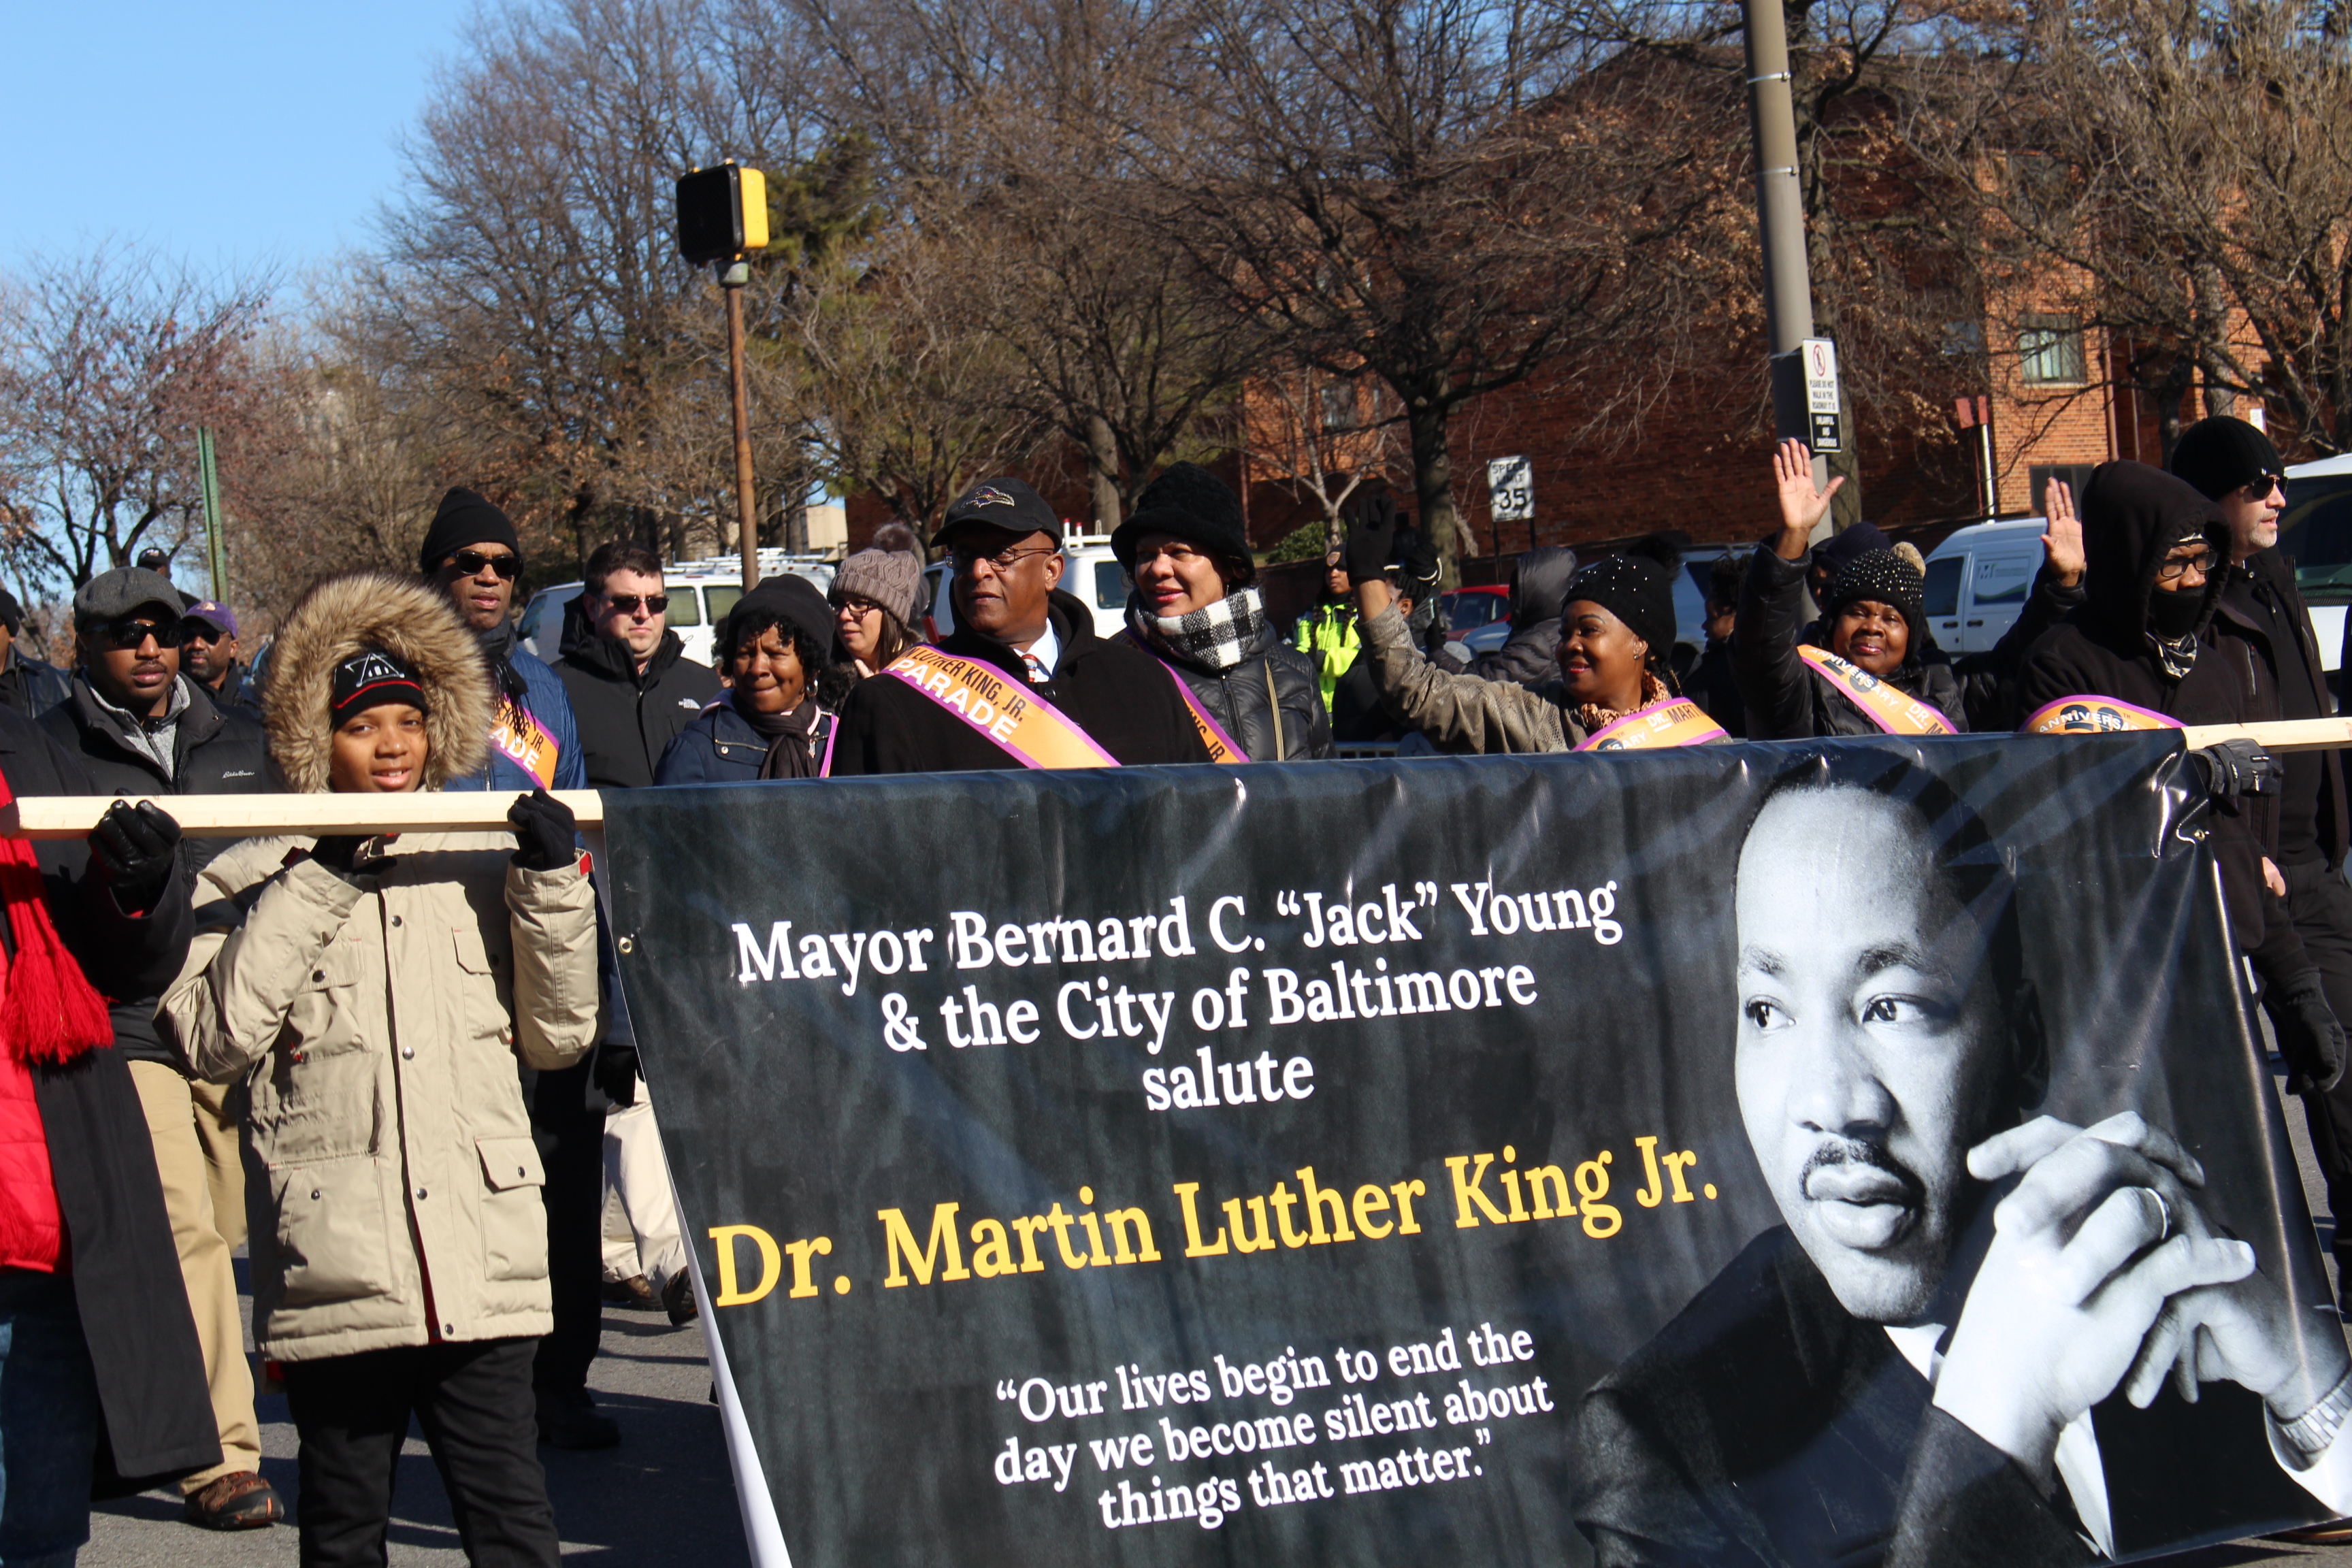 20th Martin Luther King Jr. Day Parade